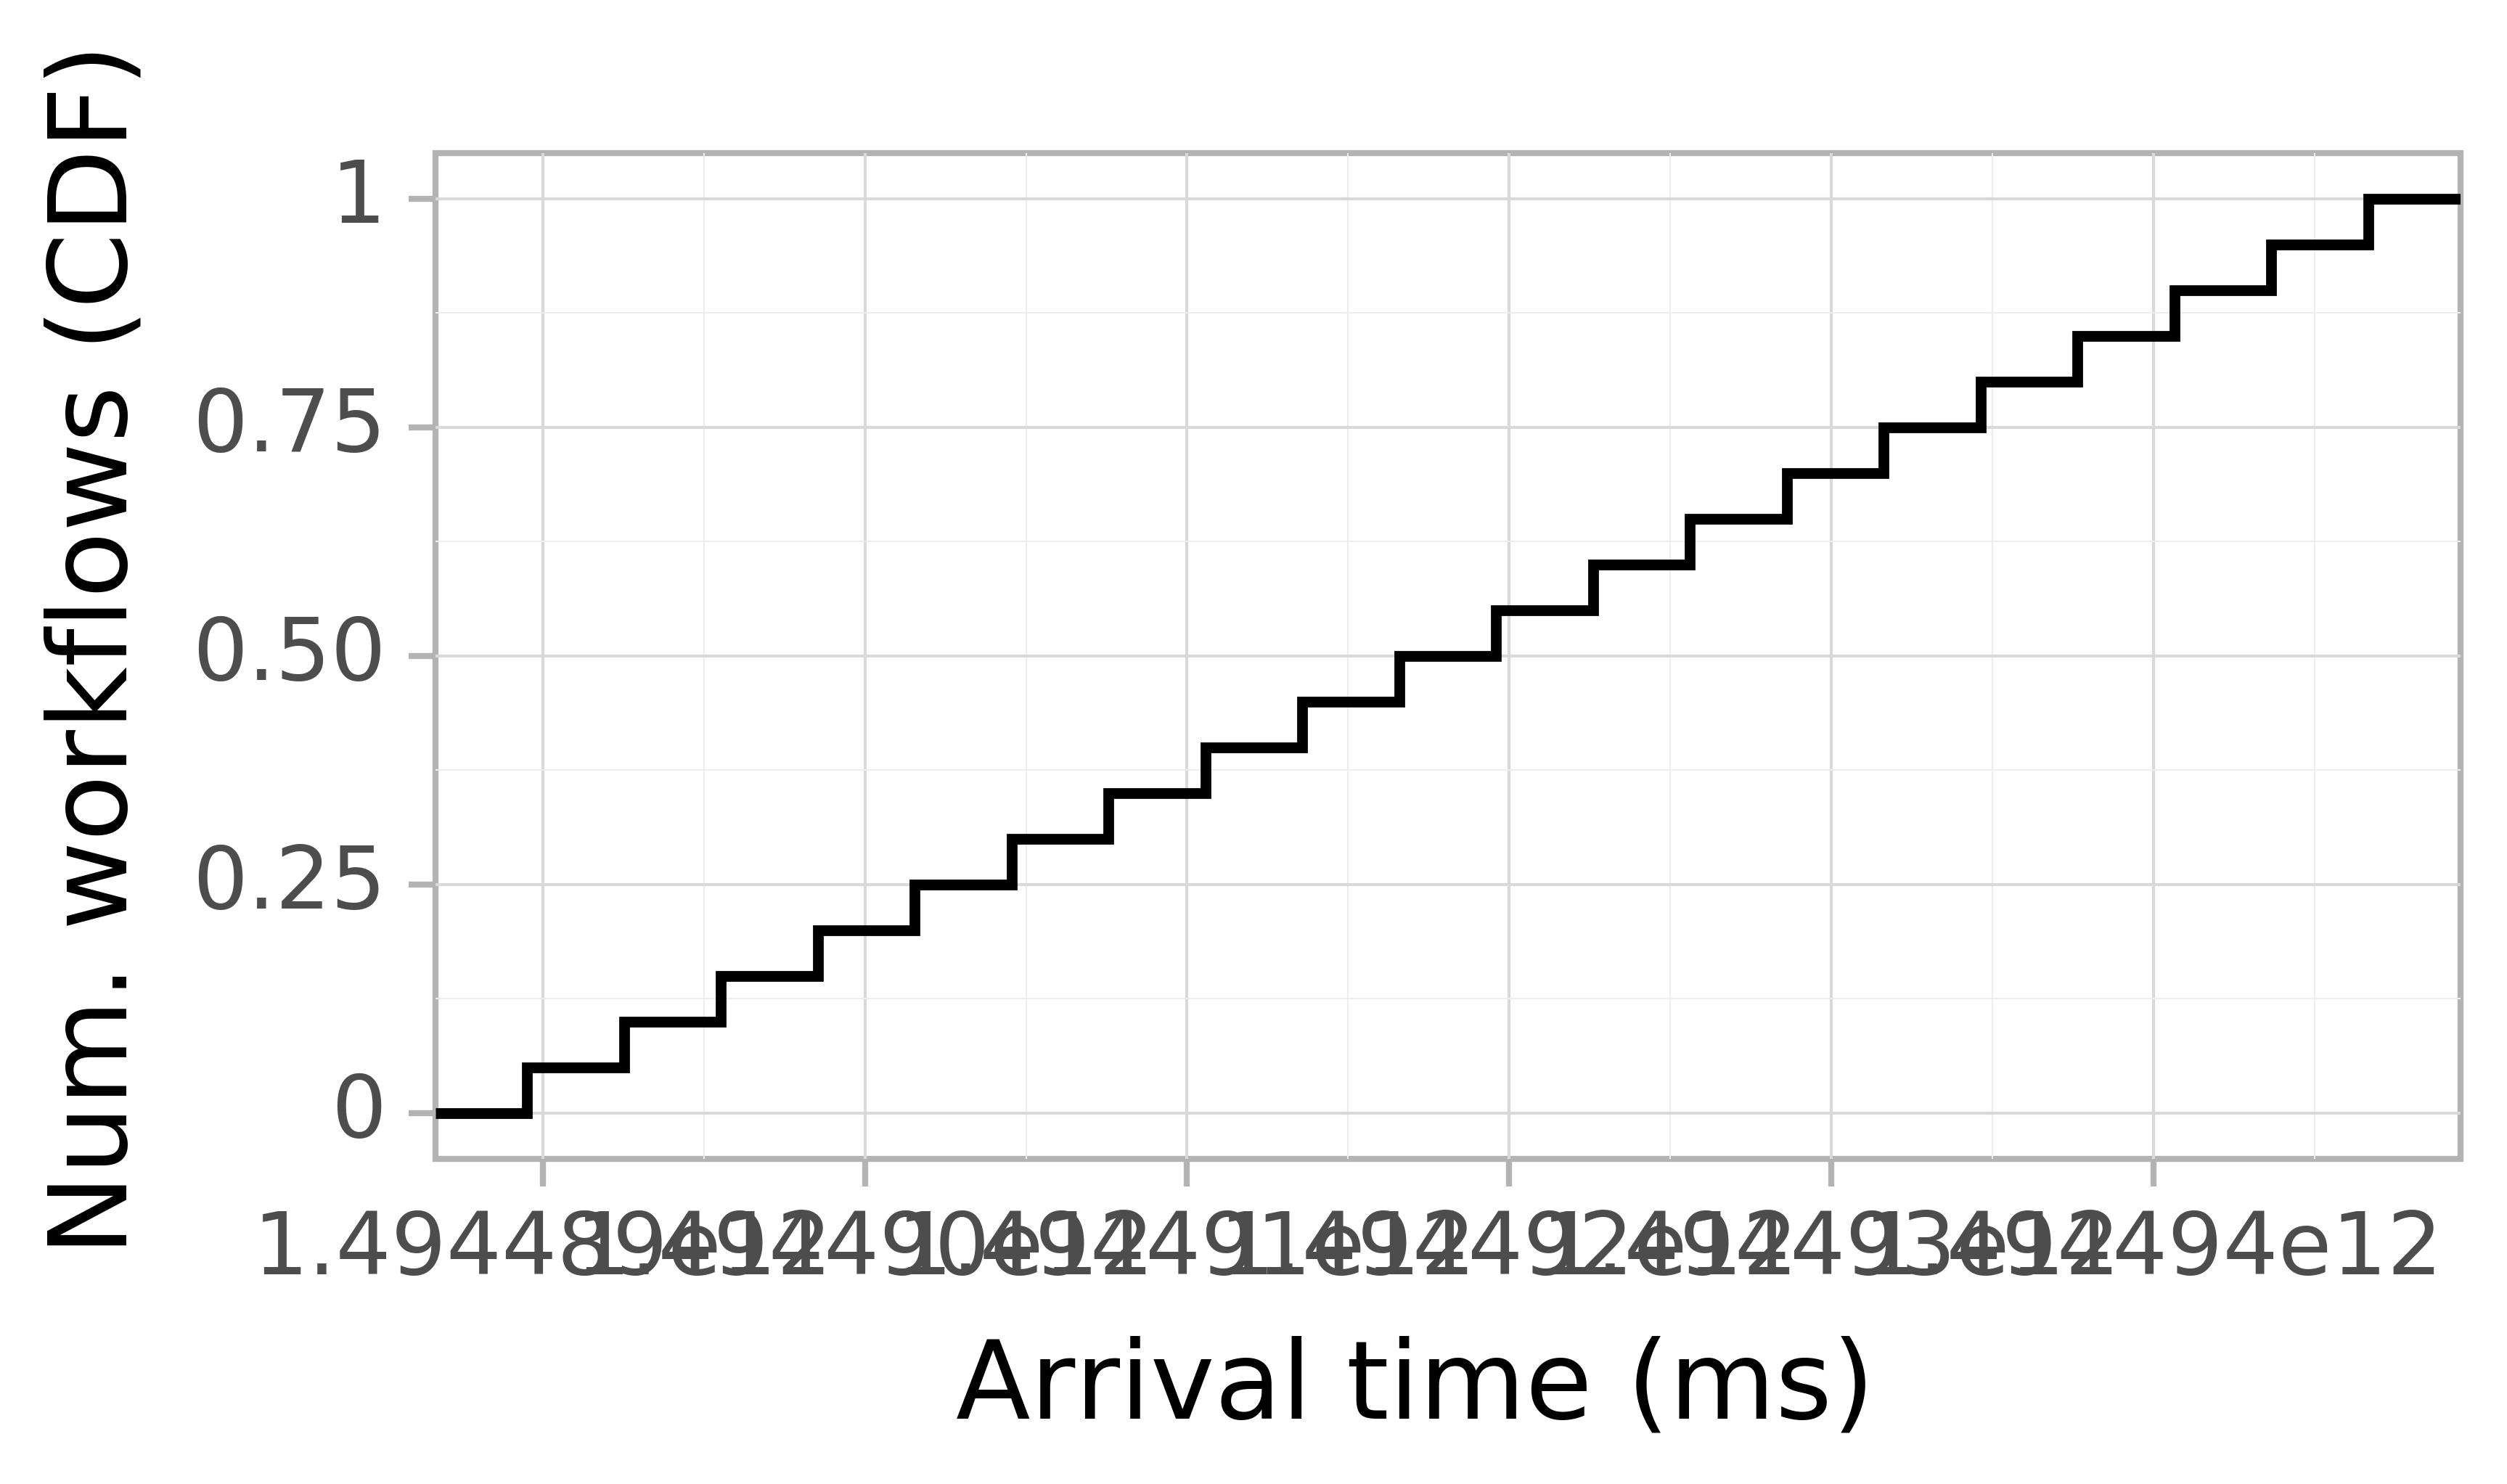 Job arrival CDF graph for the askalon-new_ee46 trace.